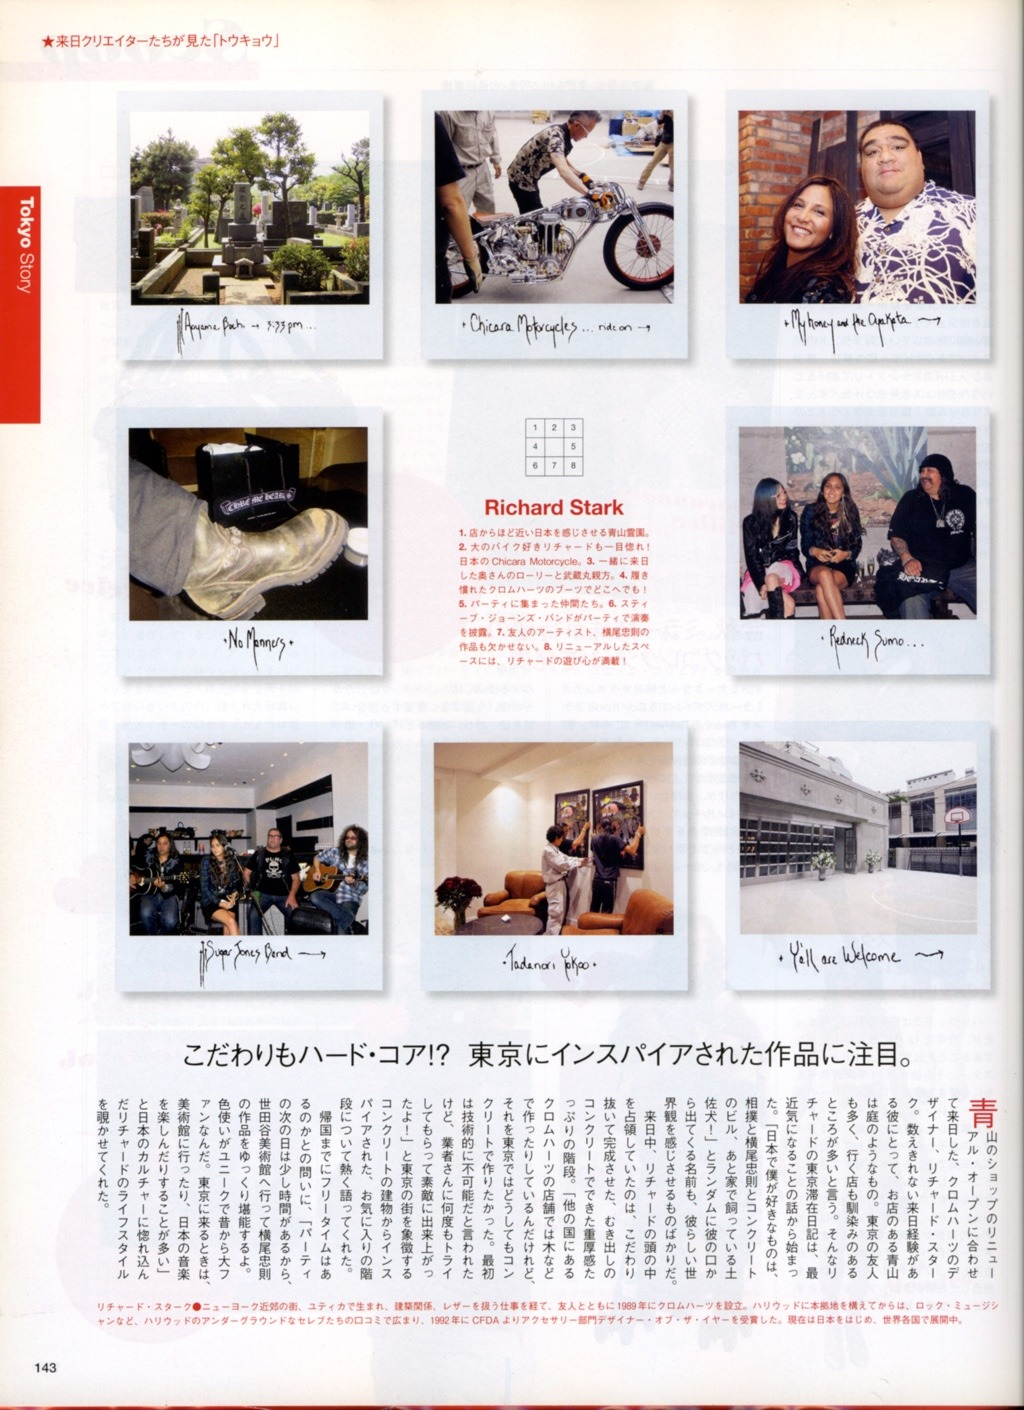 A photo of a page inside a Japanese issue of Vogue magazine.